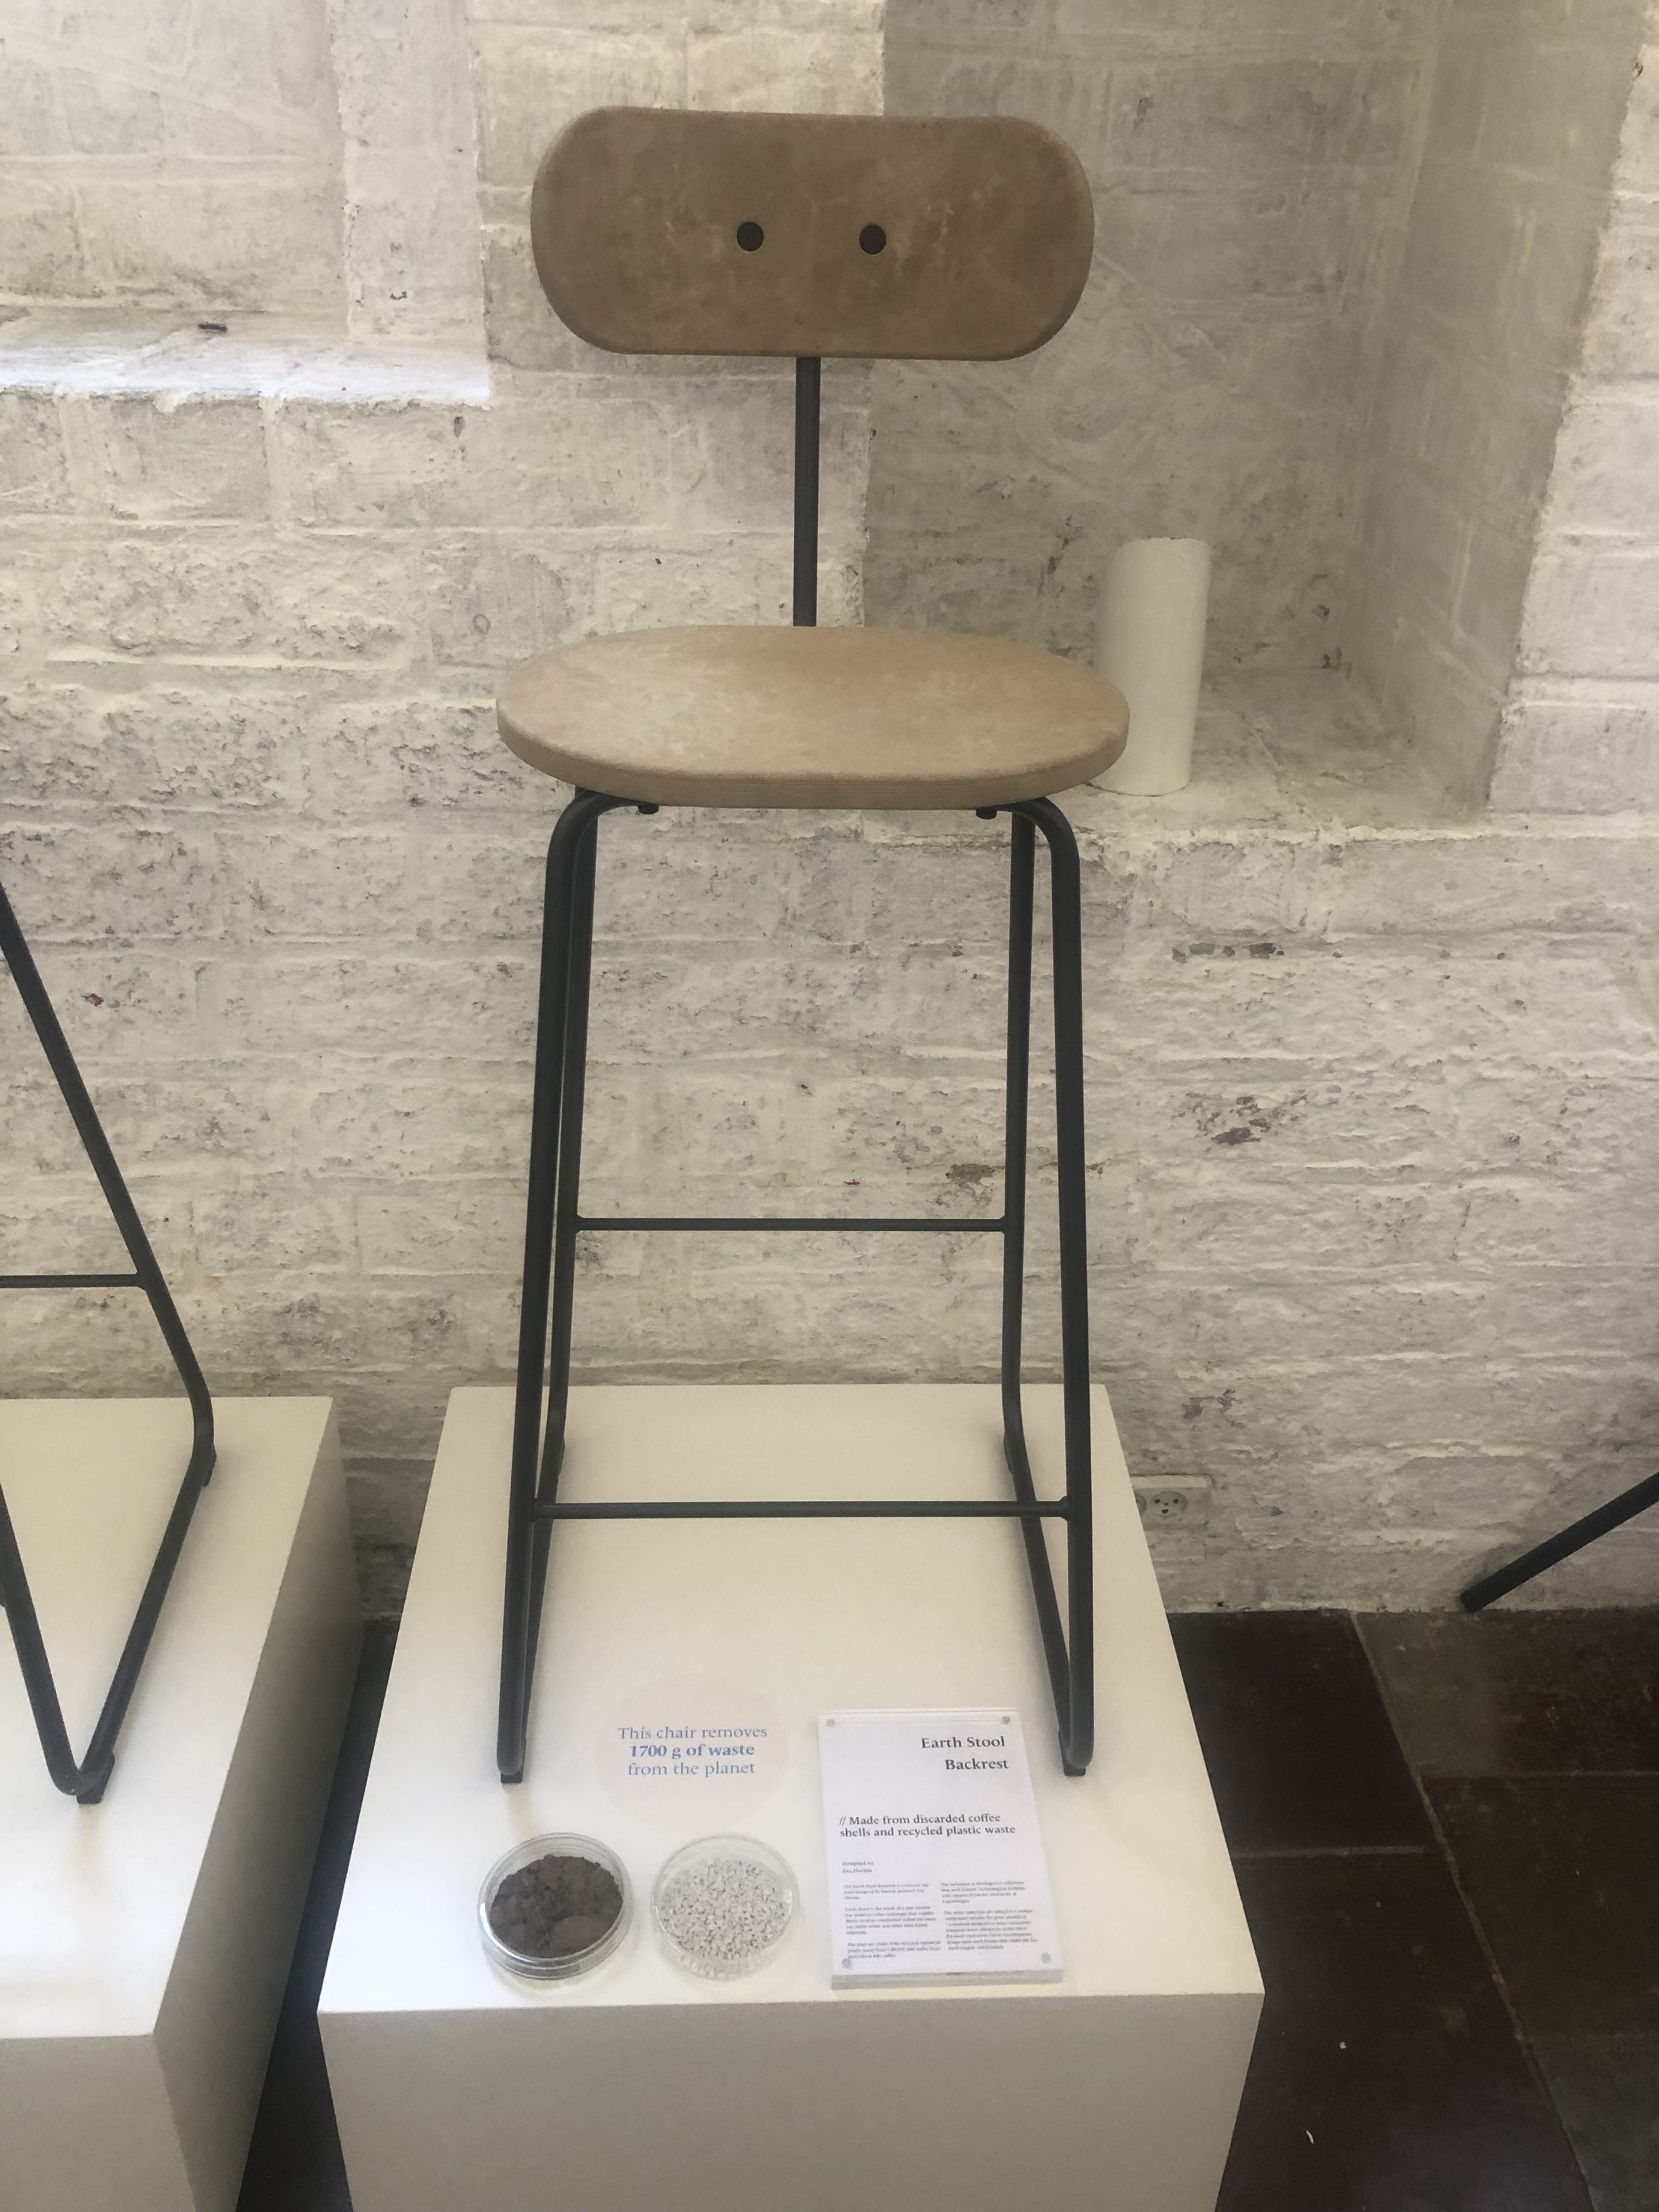 Chair made from waste